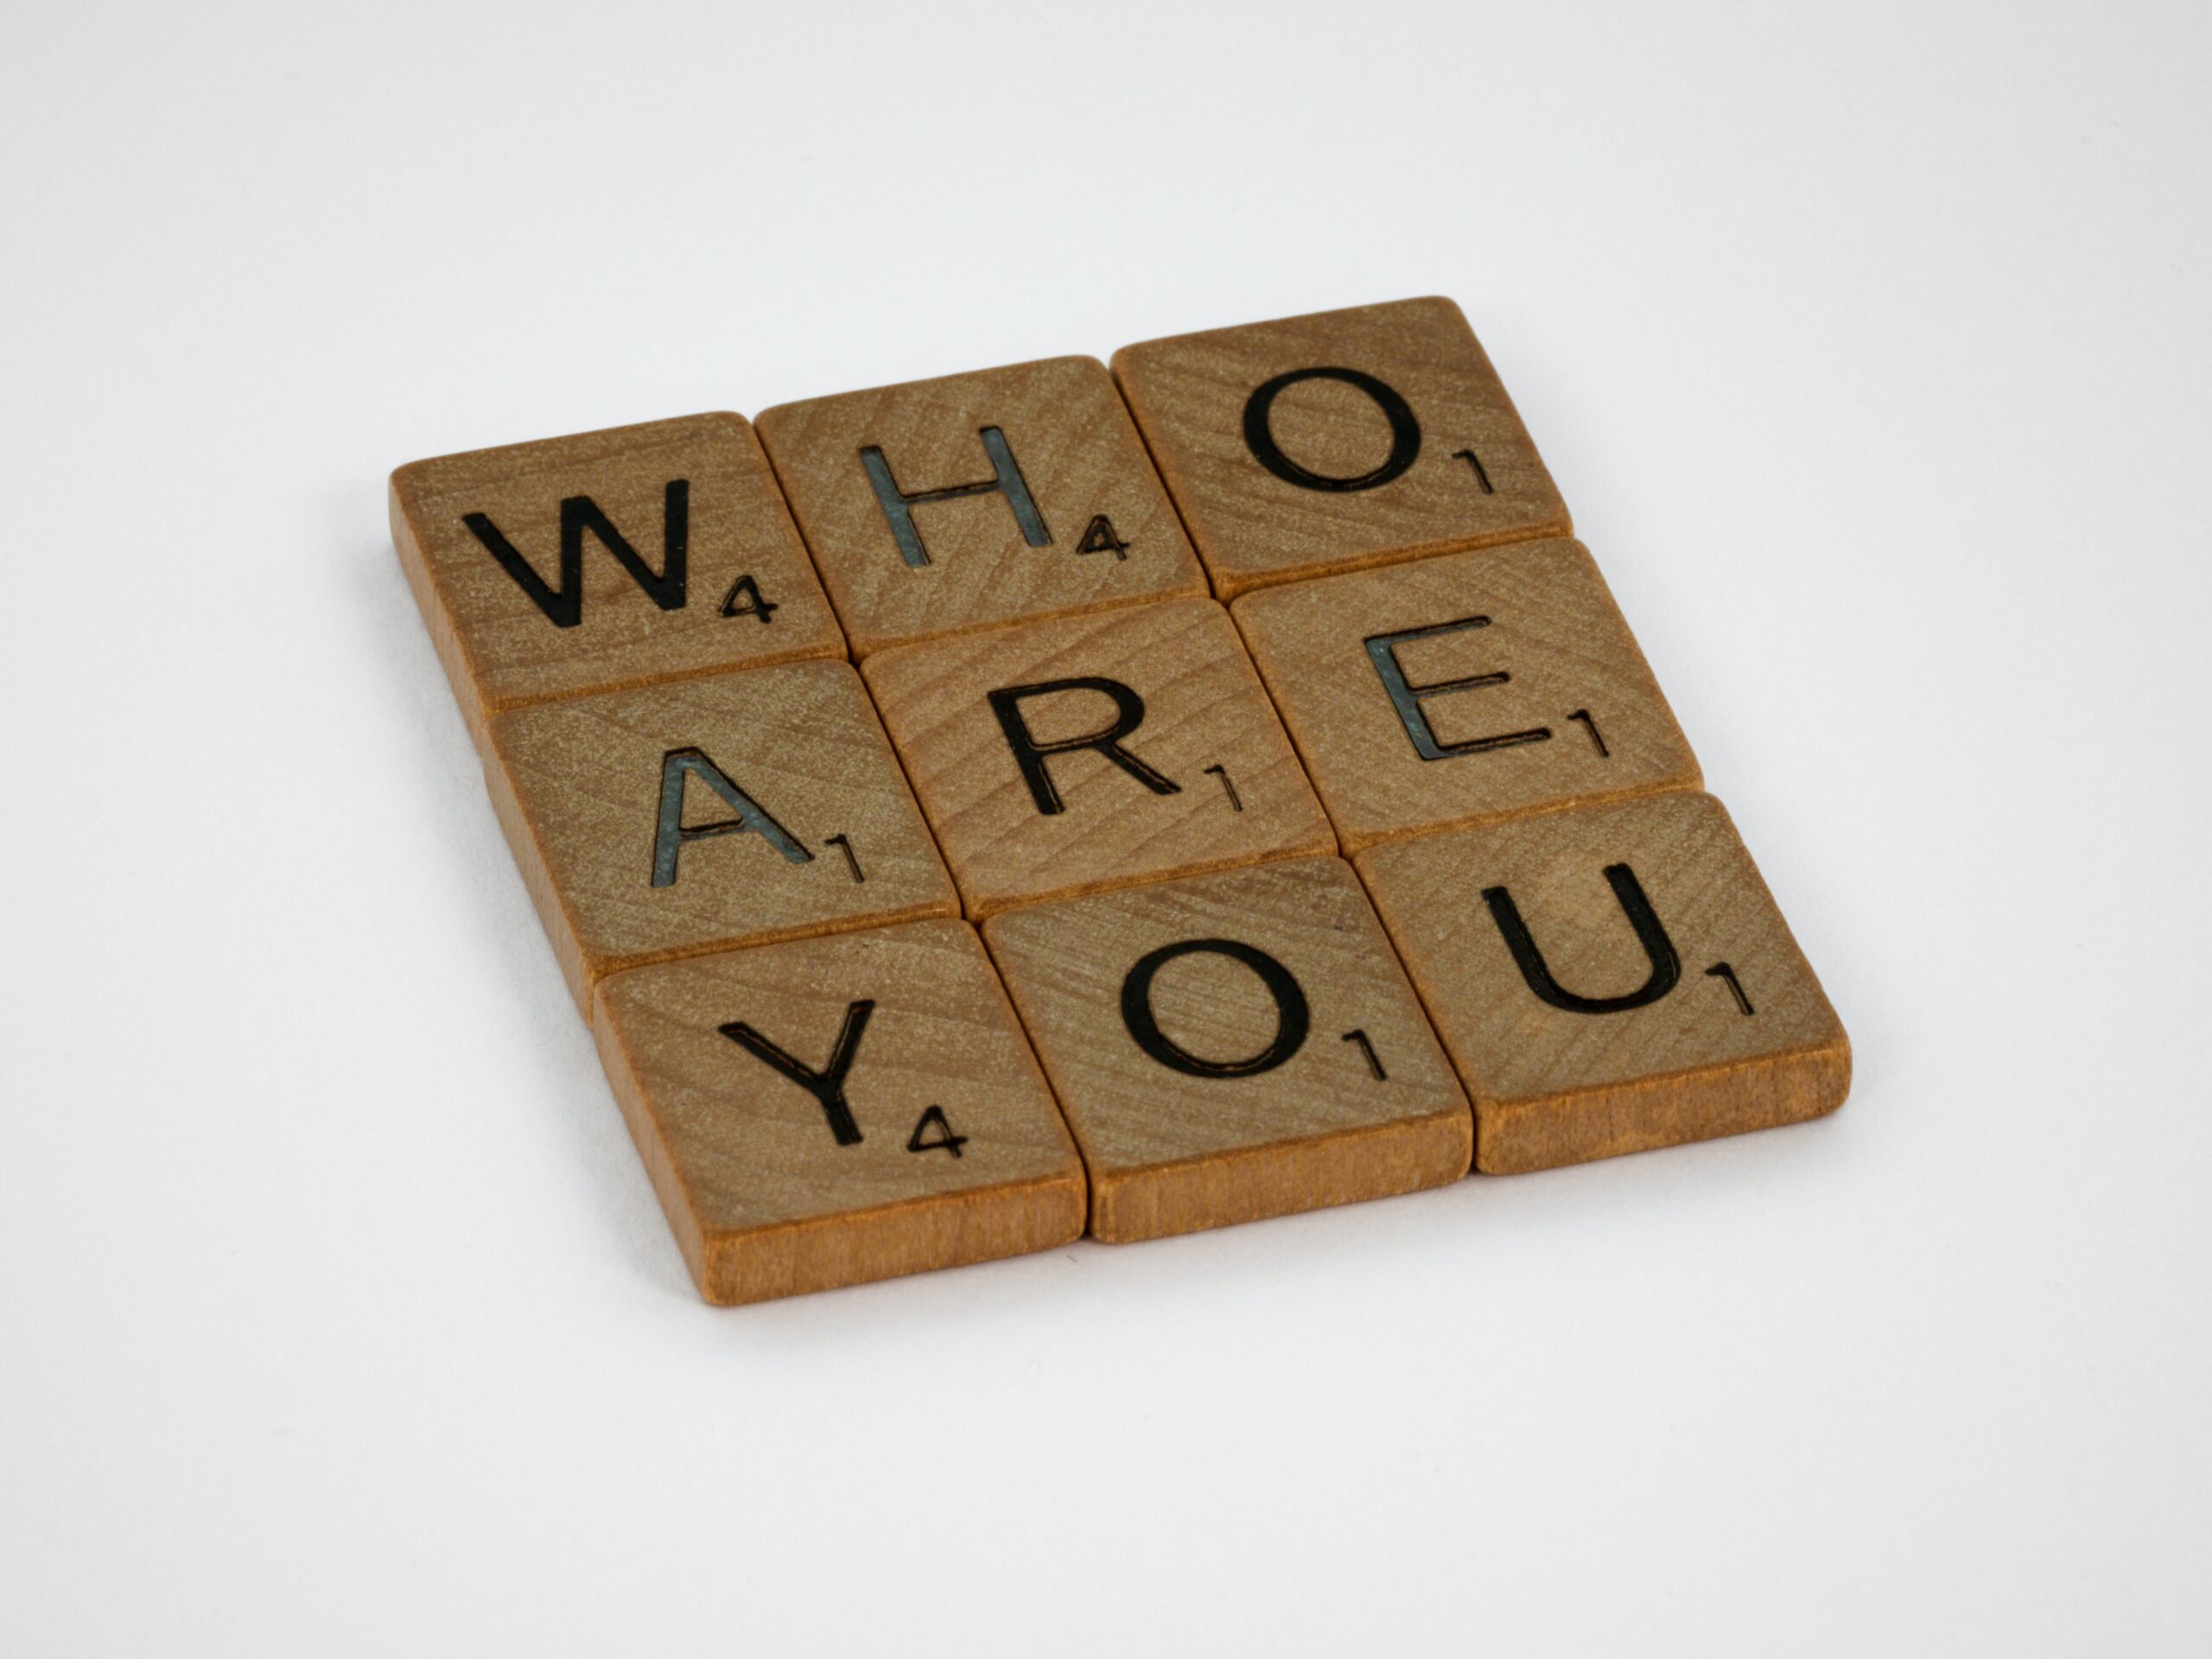 Scrabble letters on wooden tiles depicting the words who are you